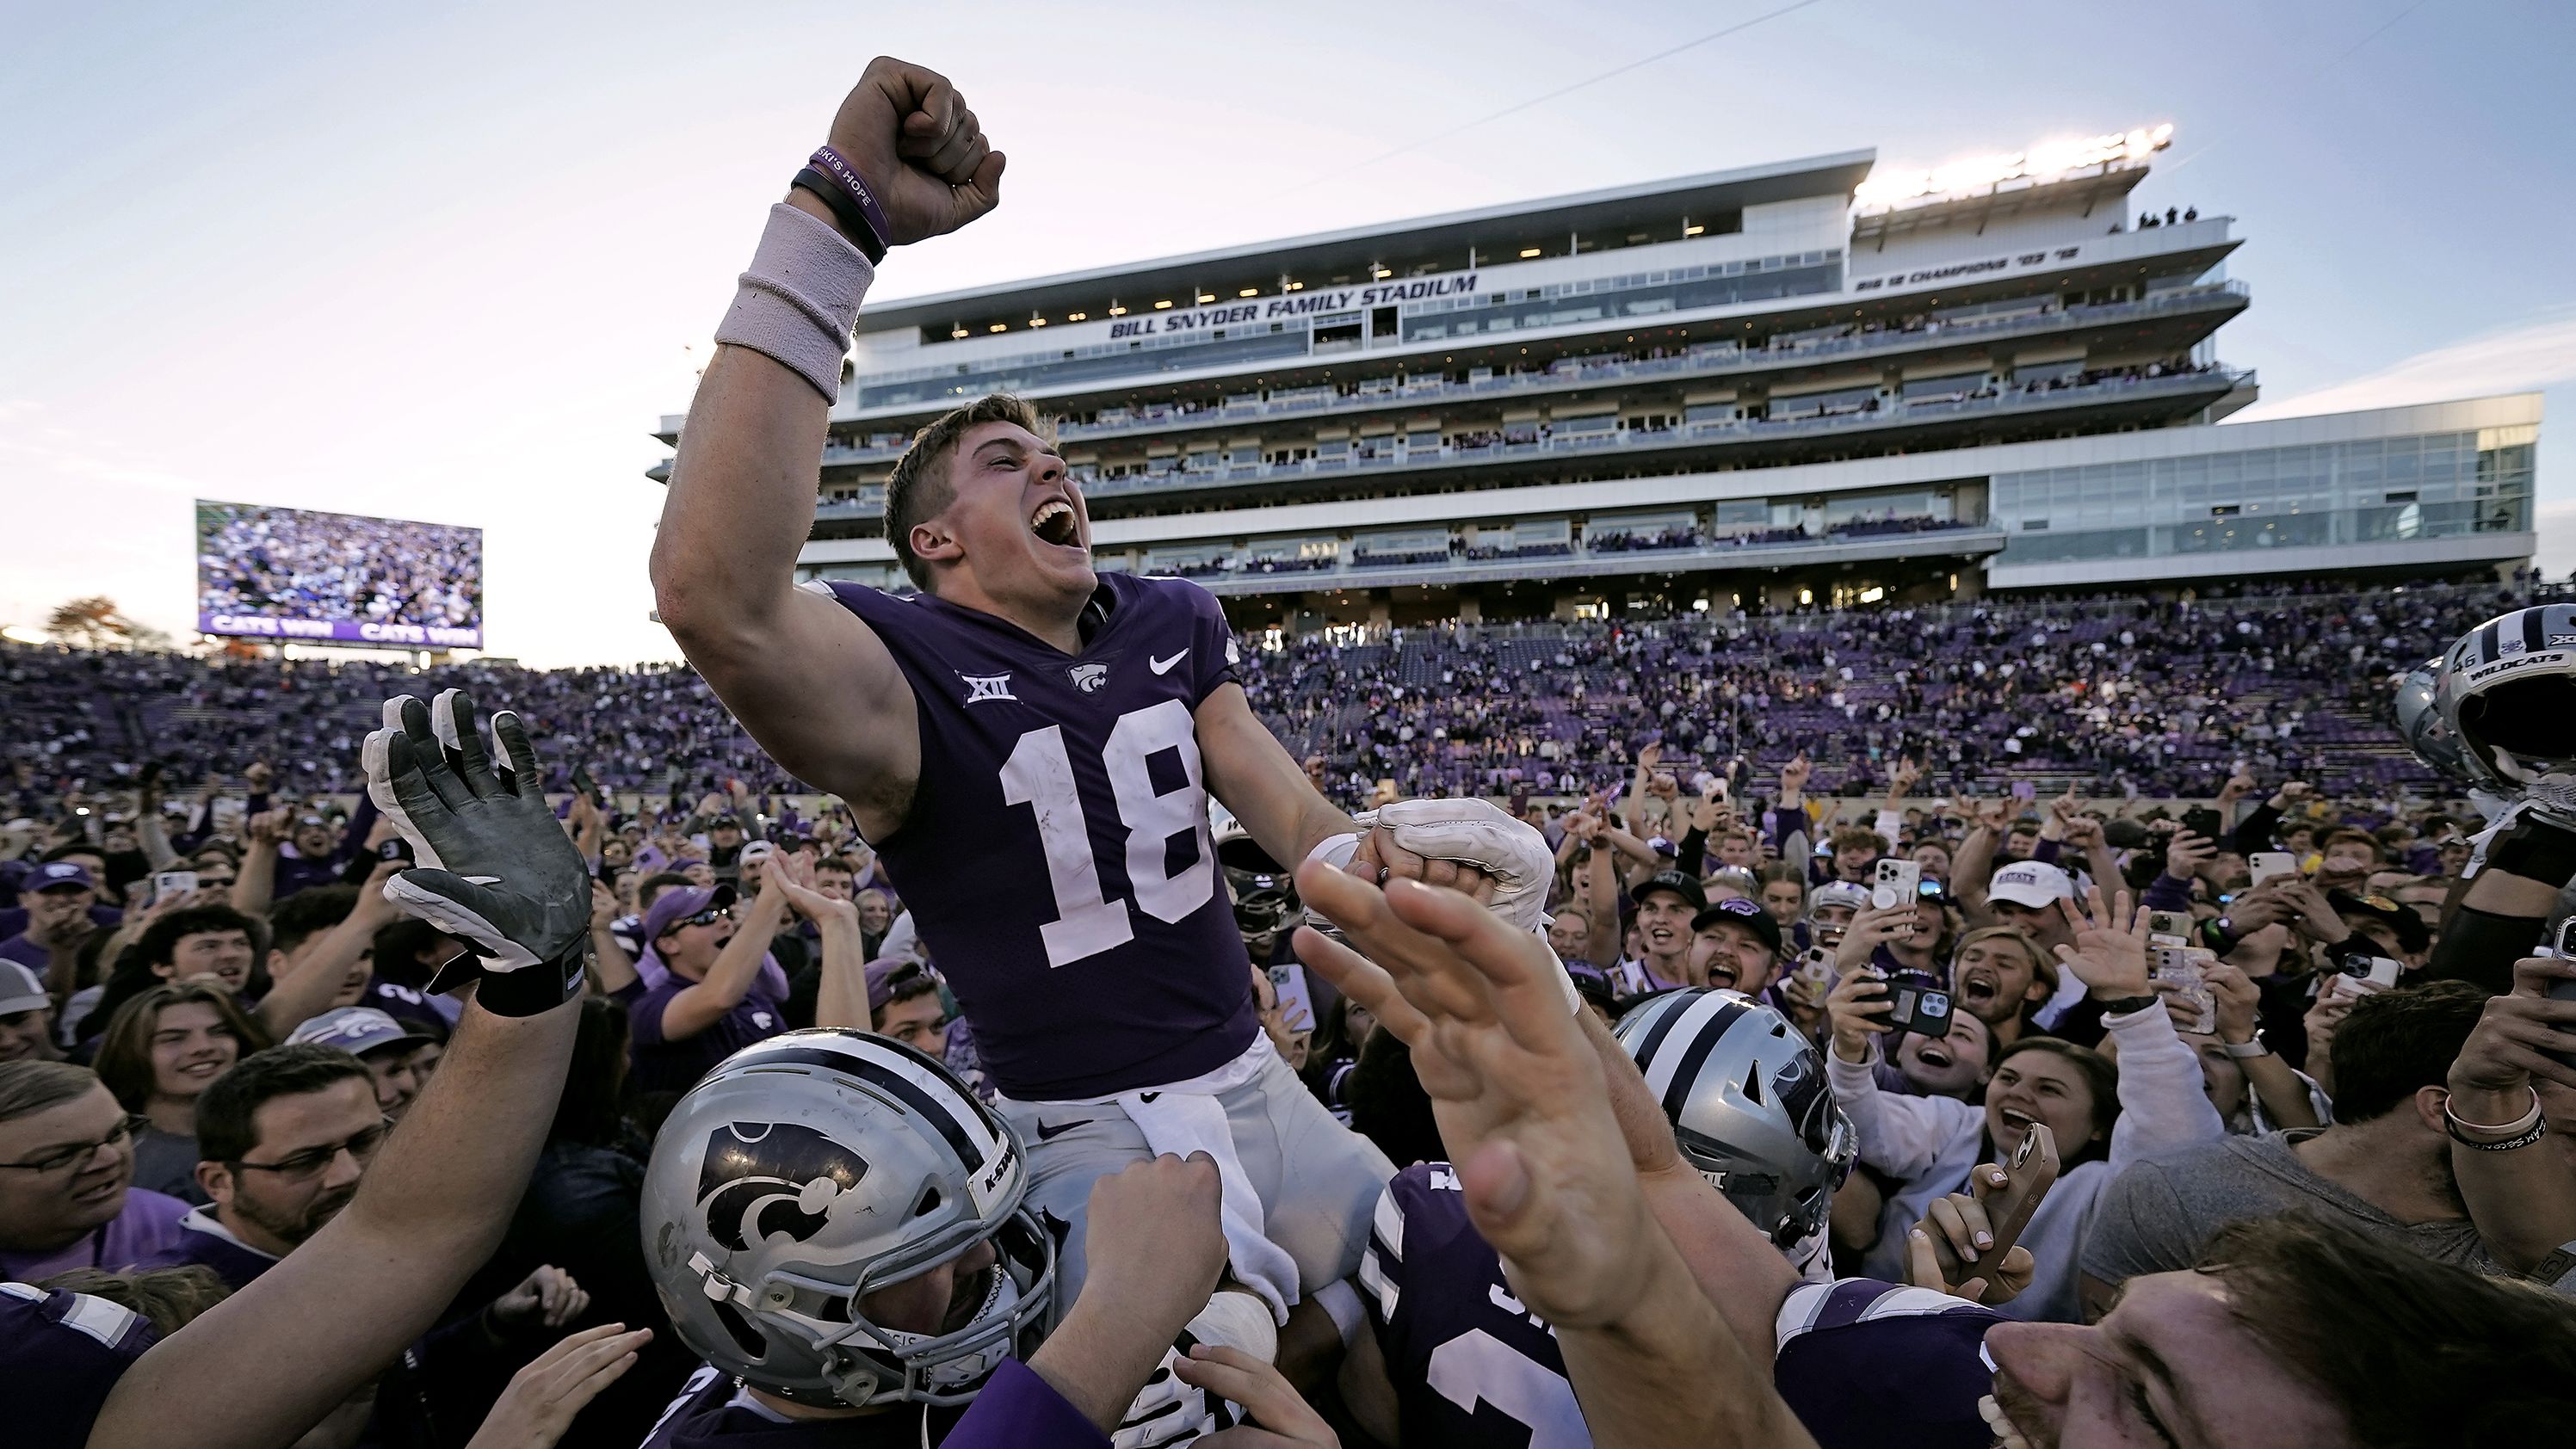 Kansas State quarterback Will Howard celebrates with the crowd as he is carried off the field by teammates after winning a college football game against Oklahoma State on Saturday, October 29. Kansas State won 48-0.